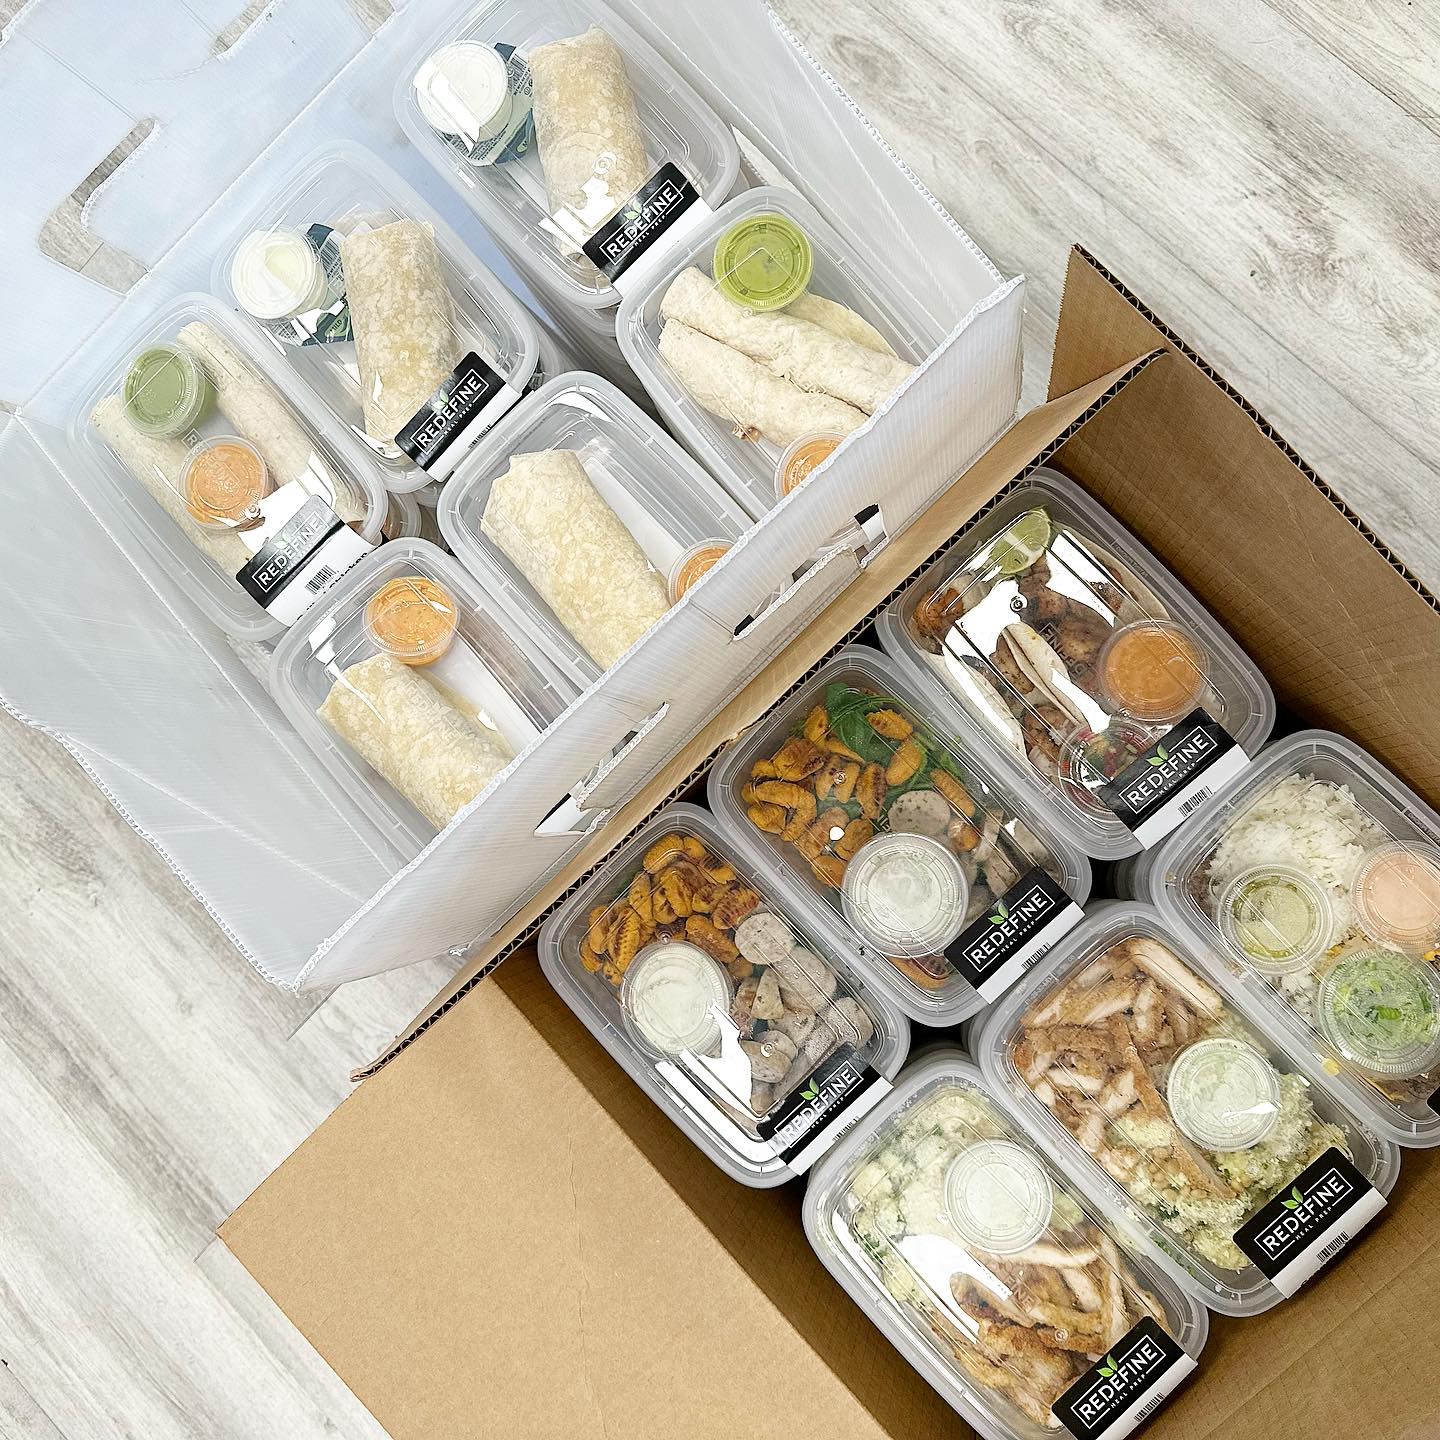 Pre-packaged lunches with the Redefine labels on them.